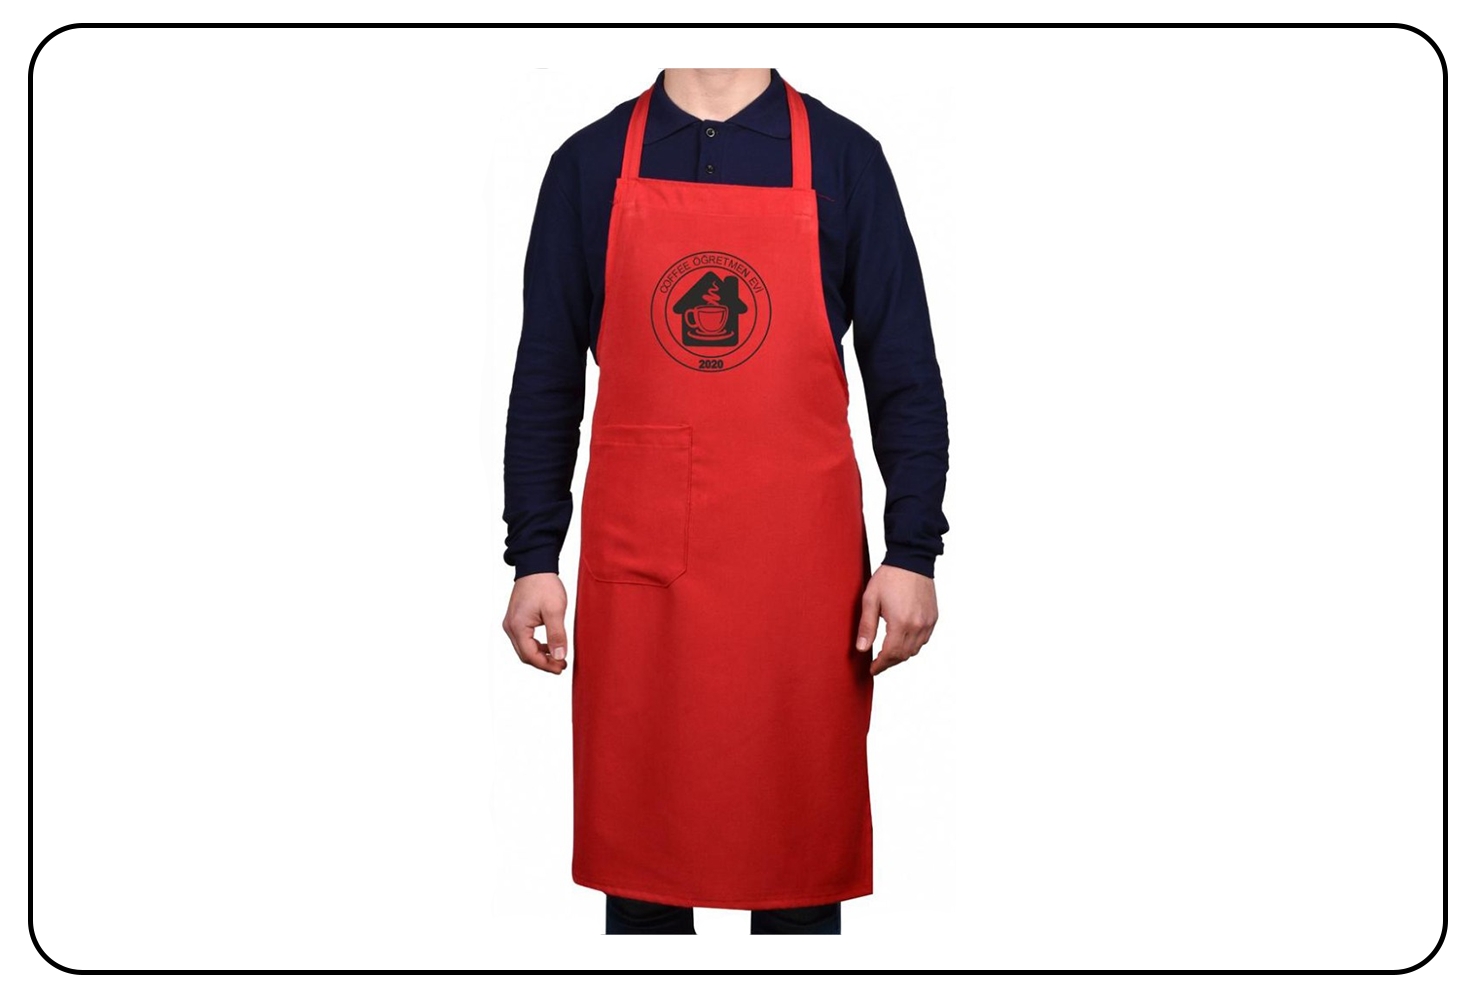 Stylish apron with embroidered print for functional elegance.